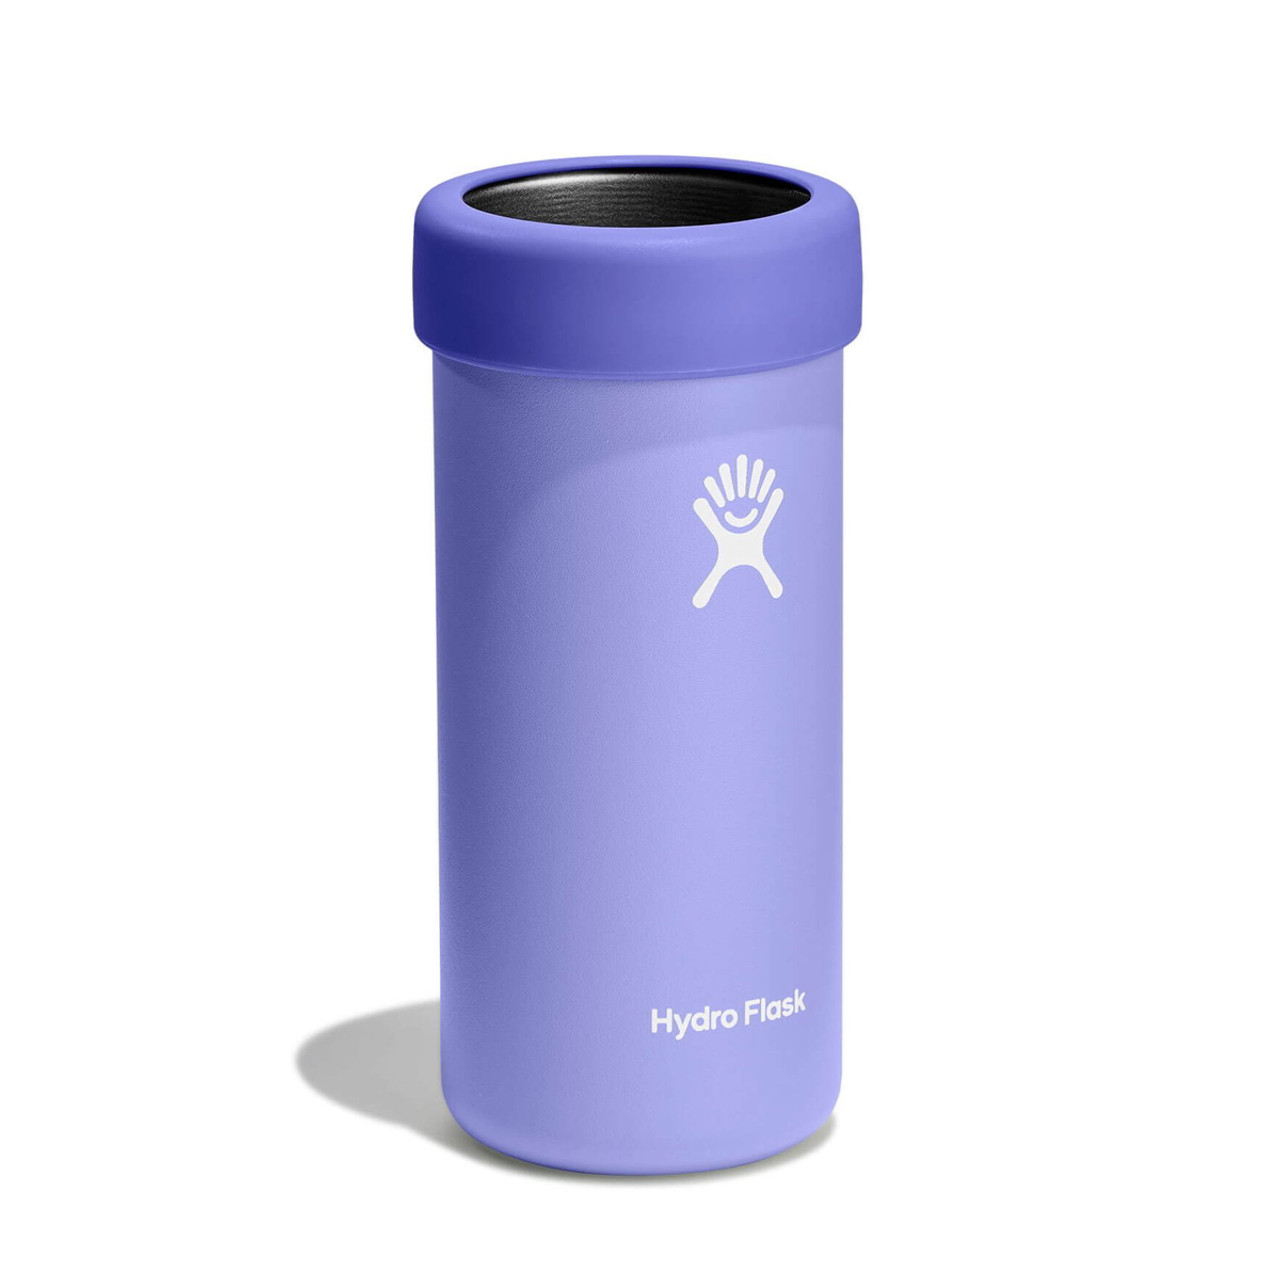 Identify Health Hydro Flask Slim Cooler Cup with Lid - 12 OZ